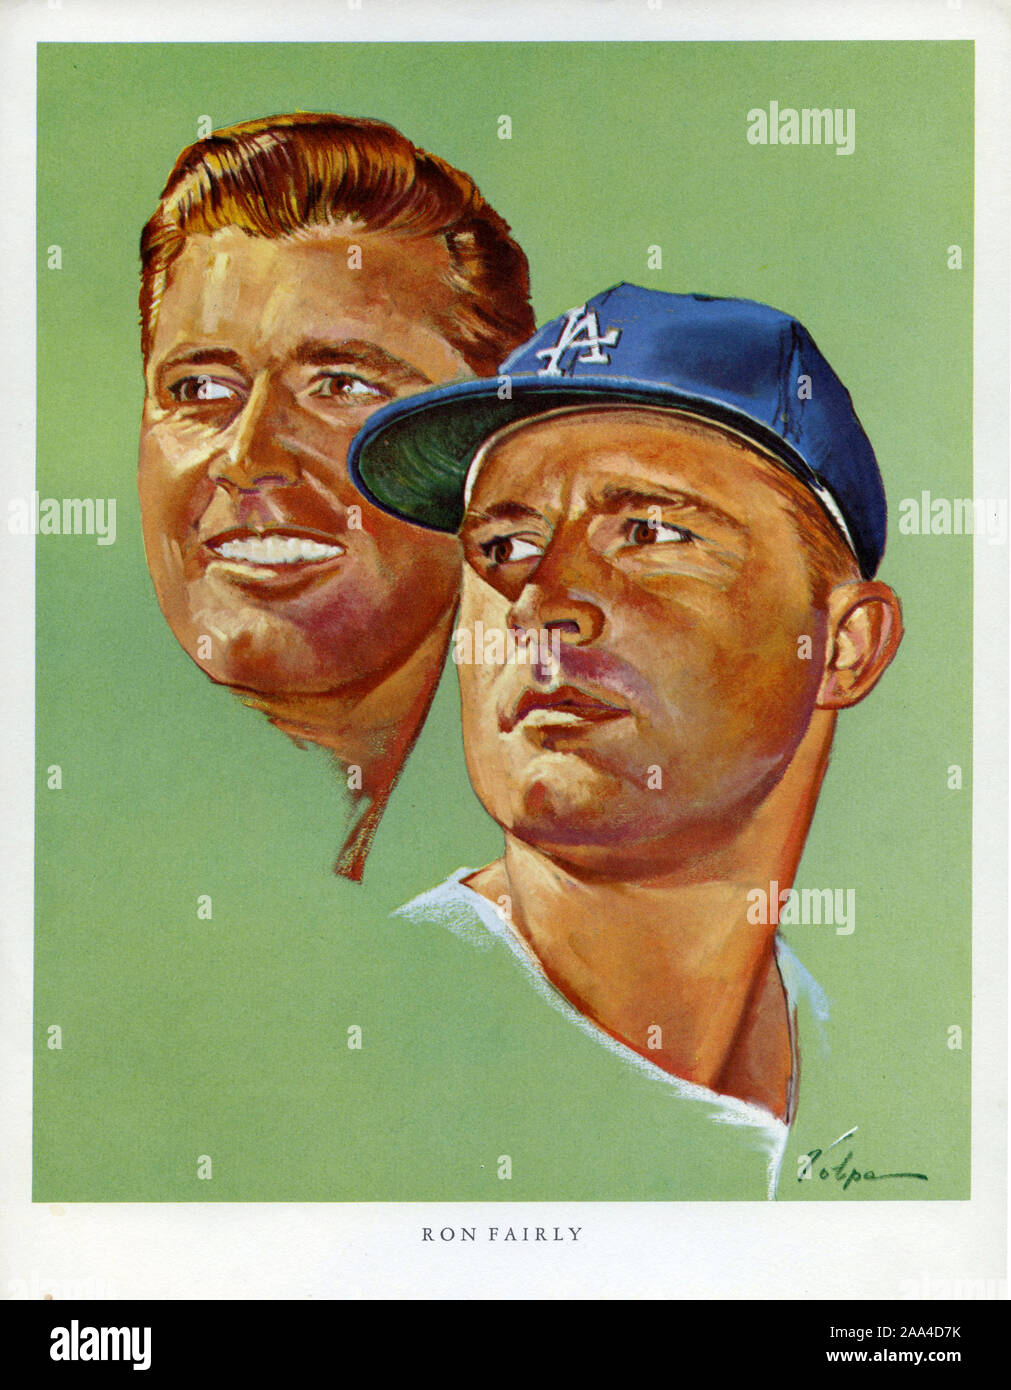 Souvenir portrait of Los Angeles Dodger player Ron Fairly by artist Nicholas Volpe was given out to customers at 76 gas stations in Los Angeles in 1964 as a promotion. Stock Photo